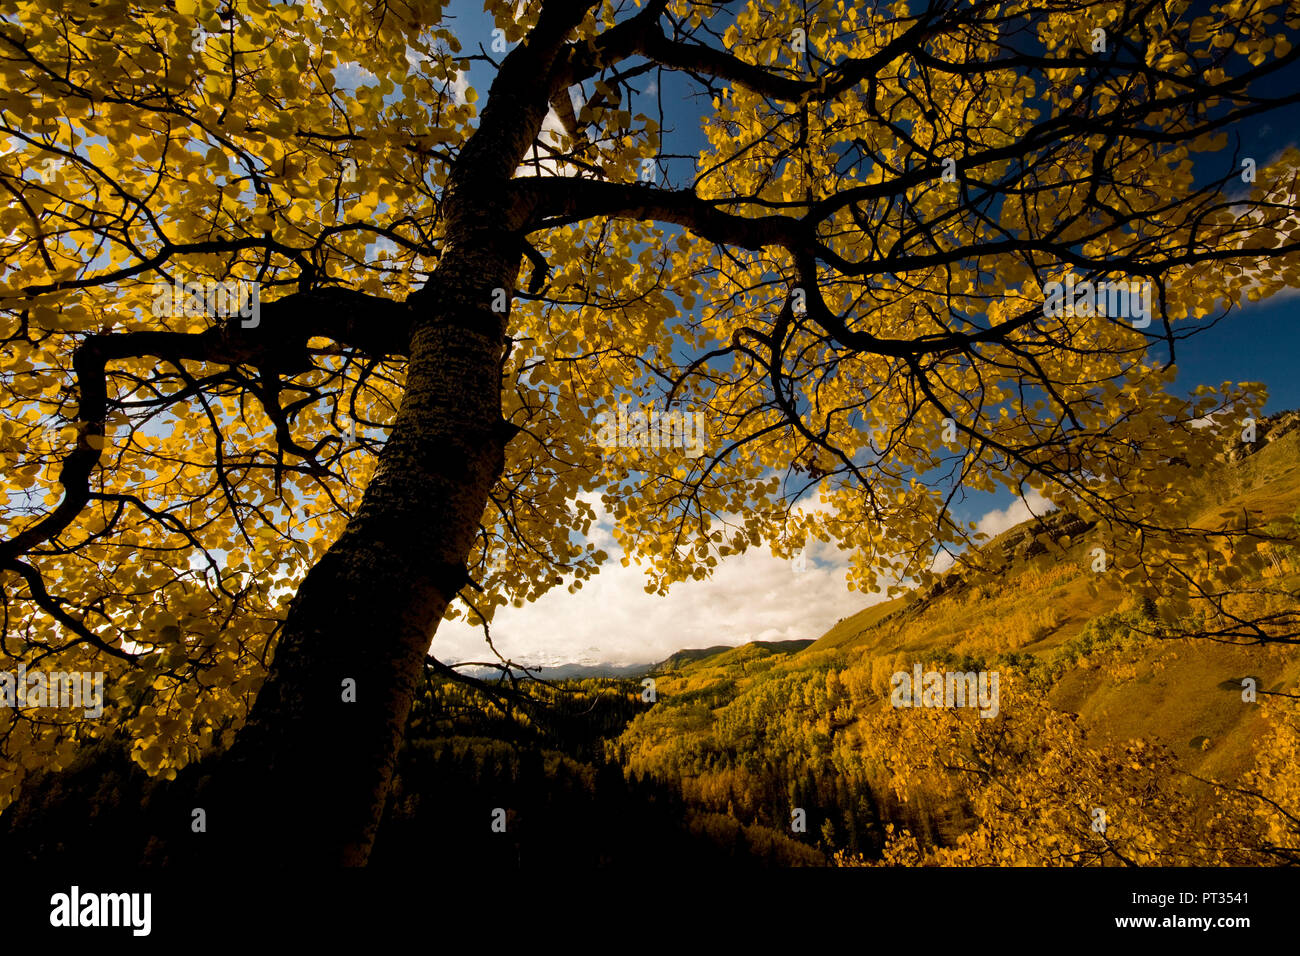 Aspen trees in fall, yellow with blue sky, Sheep Valley National Park, Alberta, Canada, Stock Photo